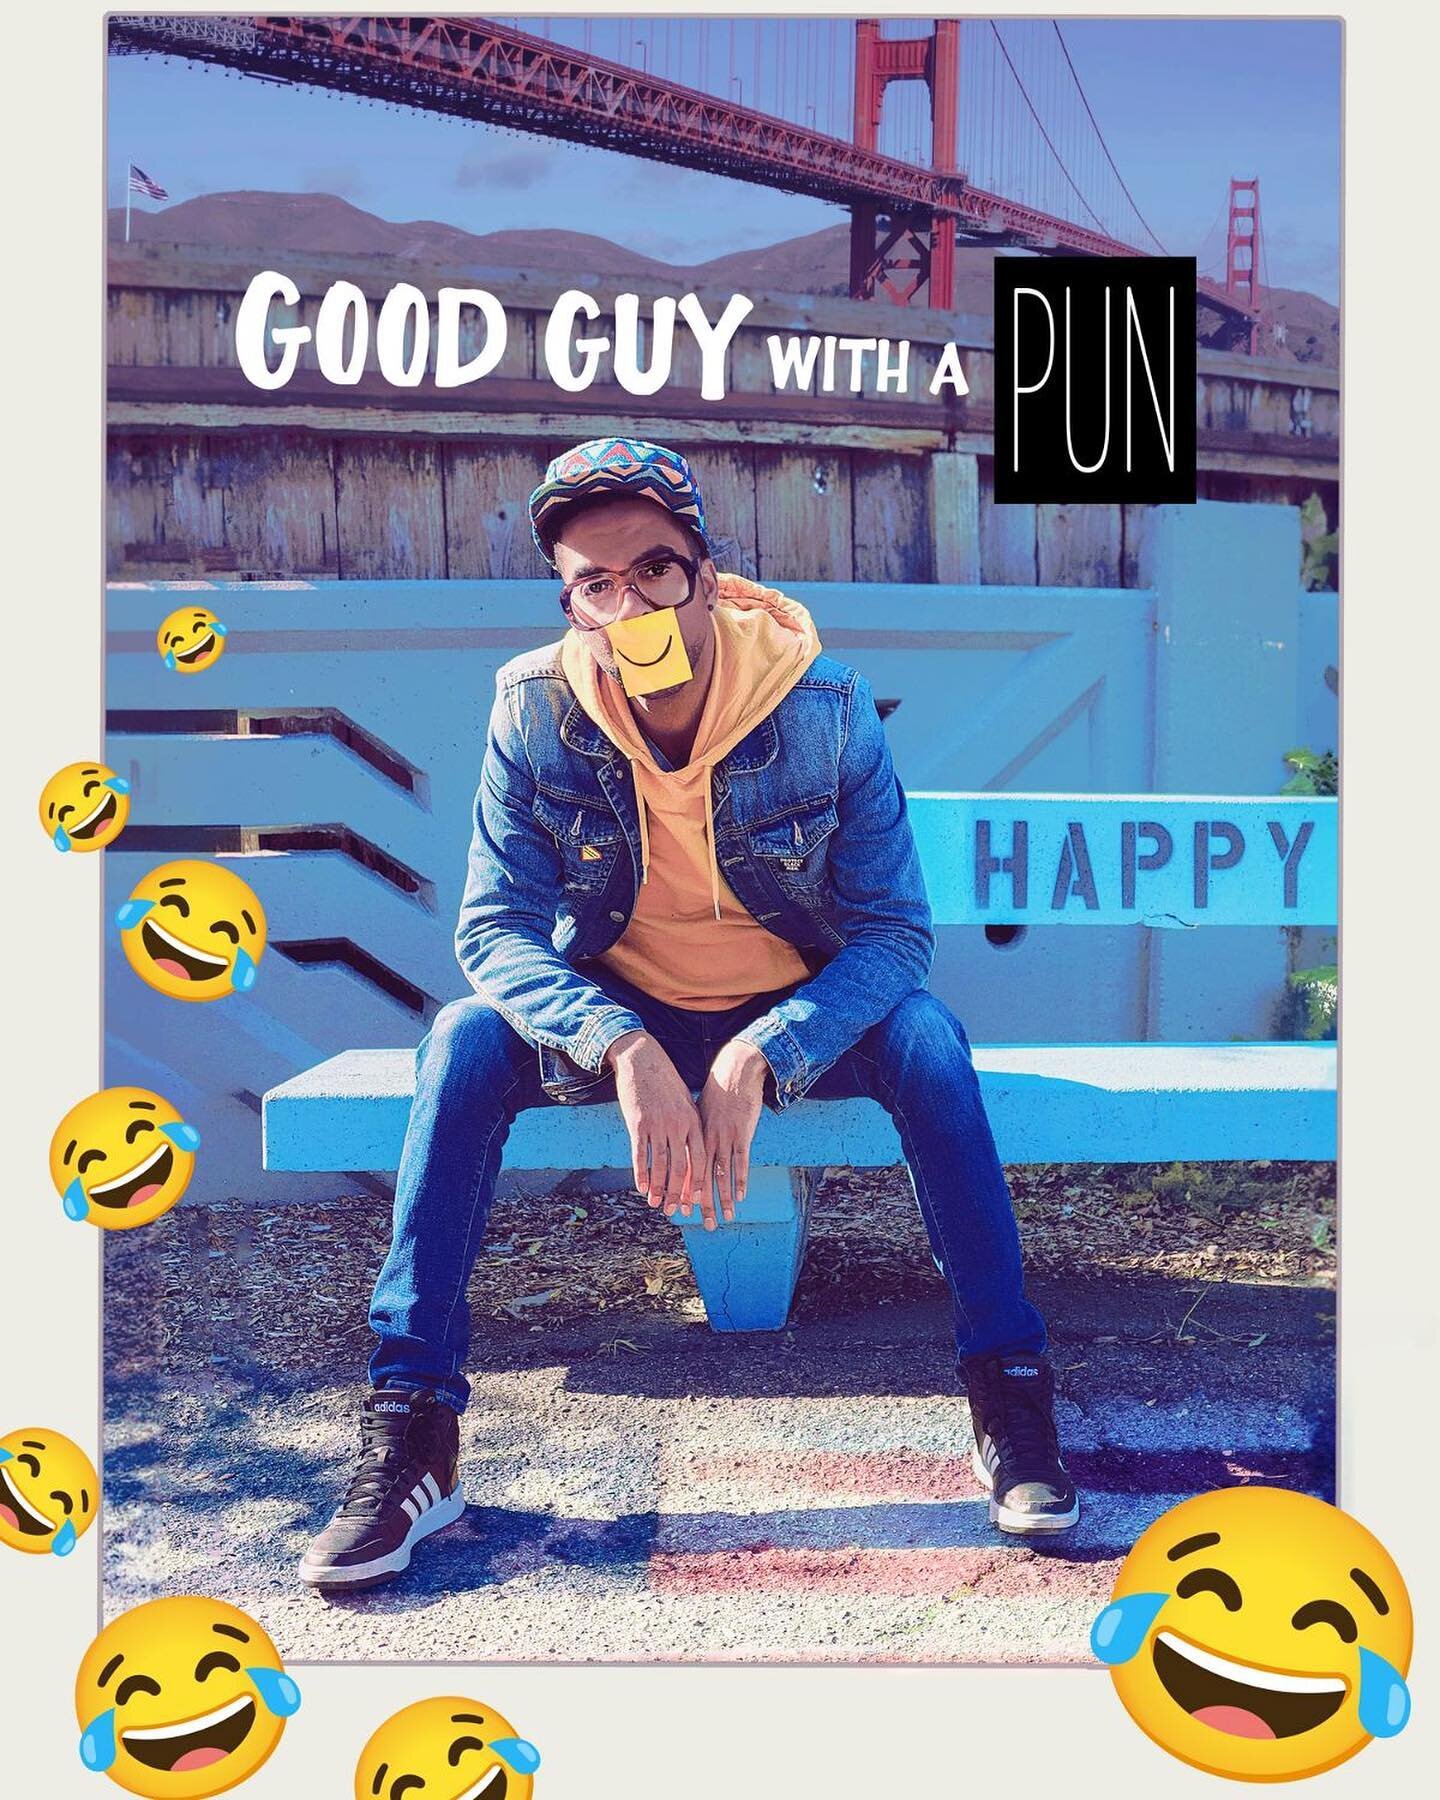 Thrilled to announce that Good Guy With A PUN, is getting its premier @seriesfest! @dmilkin wrote an awesome pilot, and I&rsquo;m so glad folks are gonna finally get to see it! LETS GO!! #pilot #indiepilot #filmfestival #seriesfest #bayarea #sanfranc